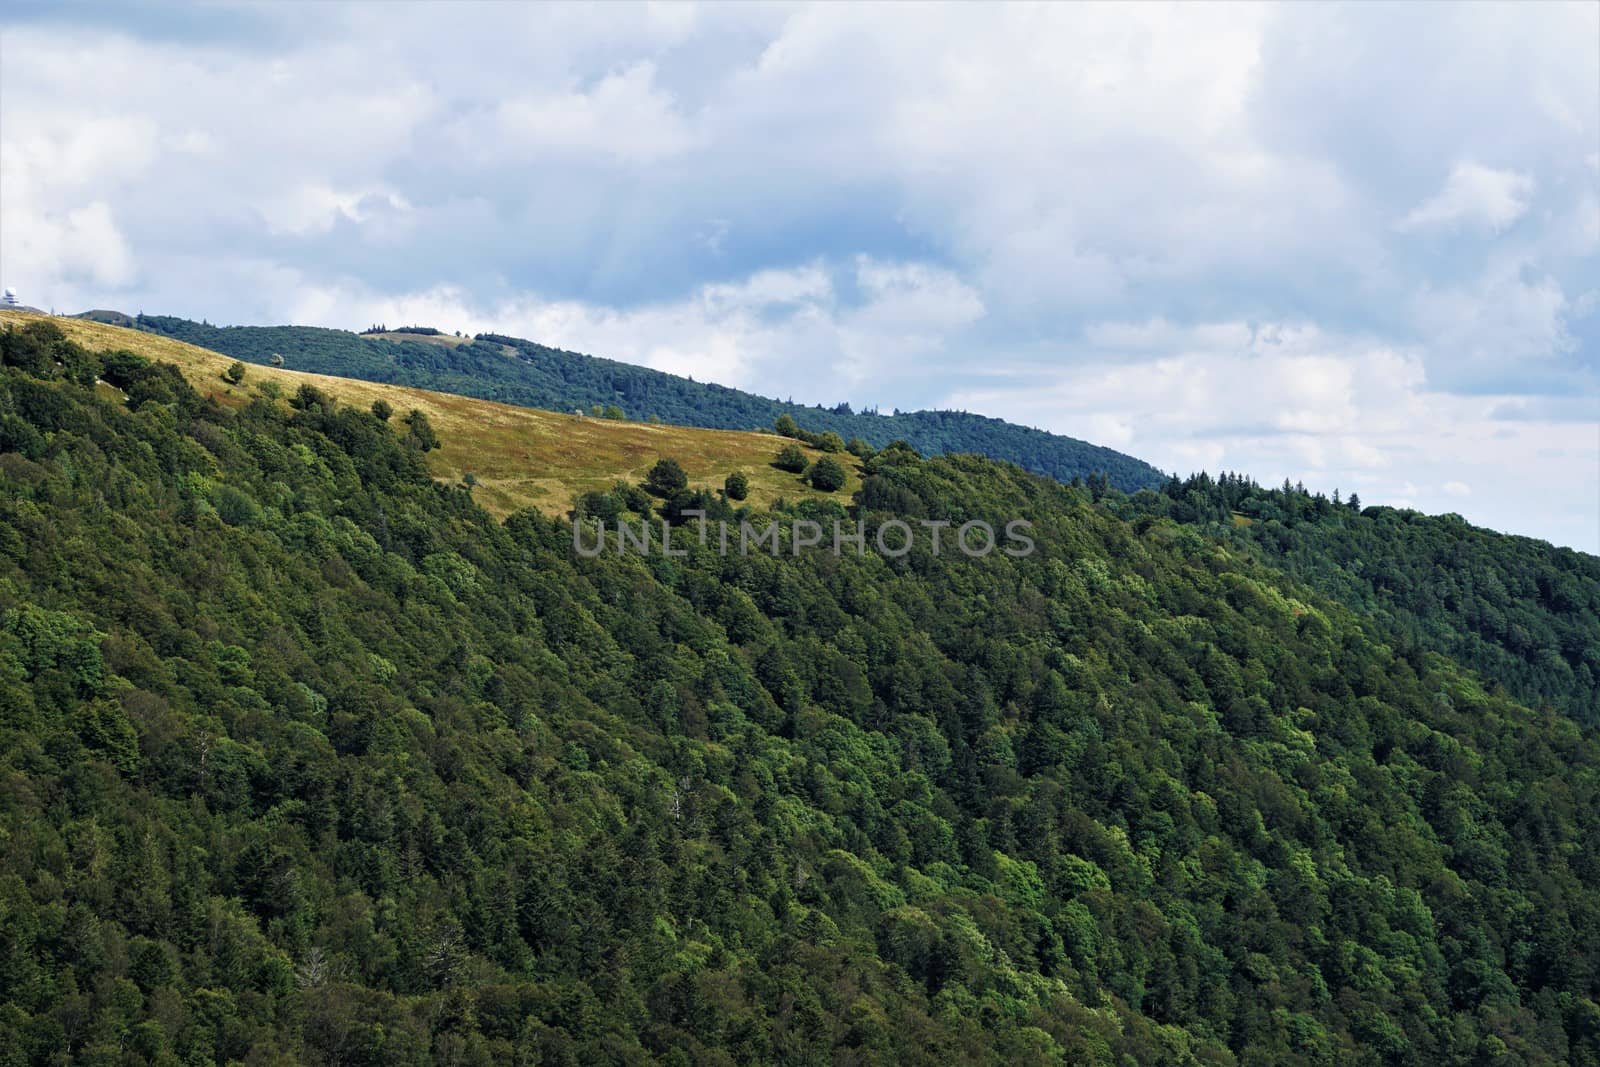 Tree less mountain tops with forest at the flanks spotted in the Vosges by pisces2386